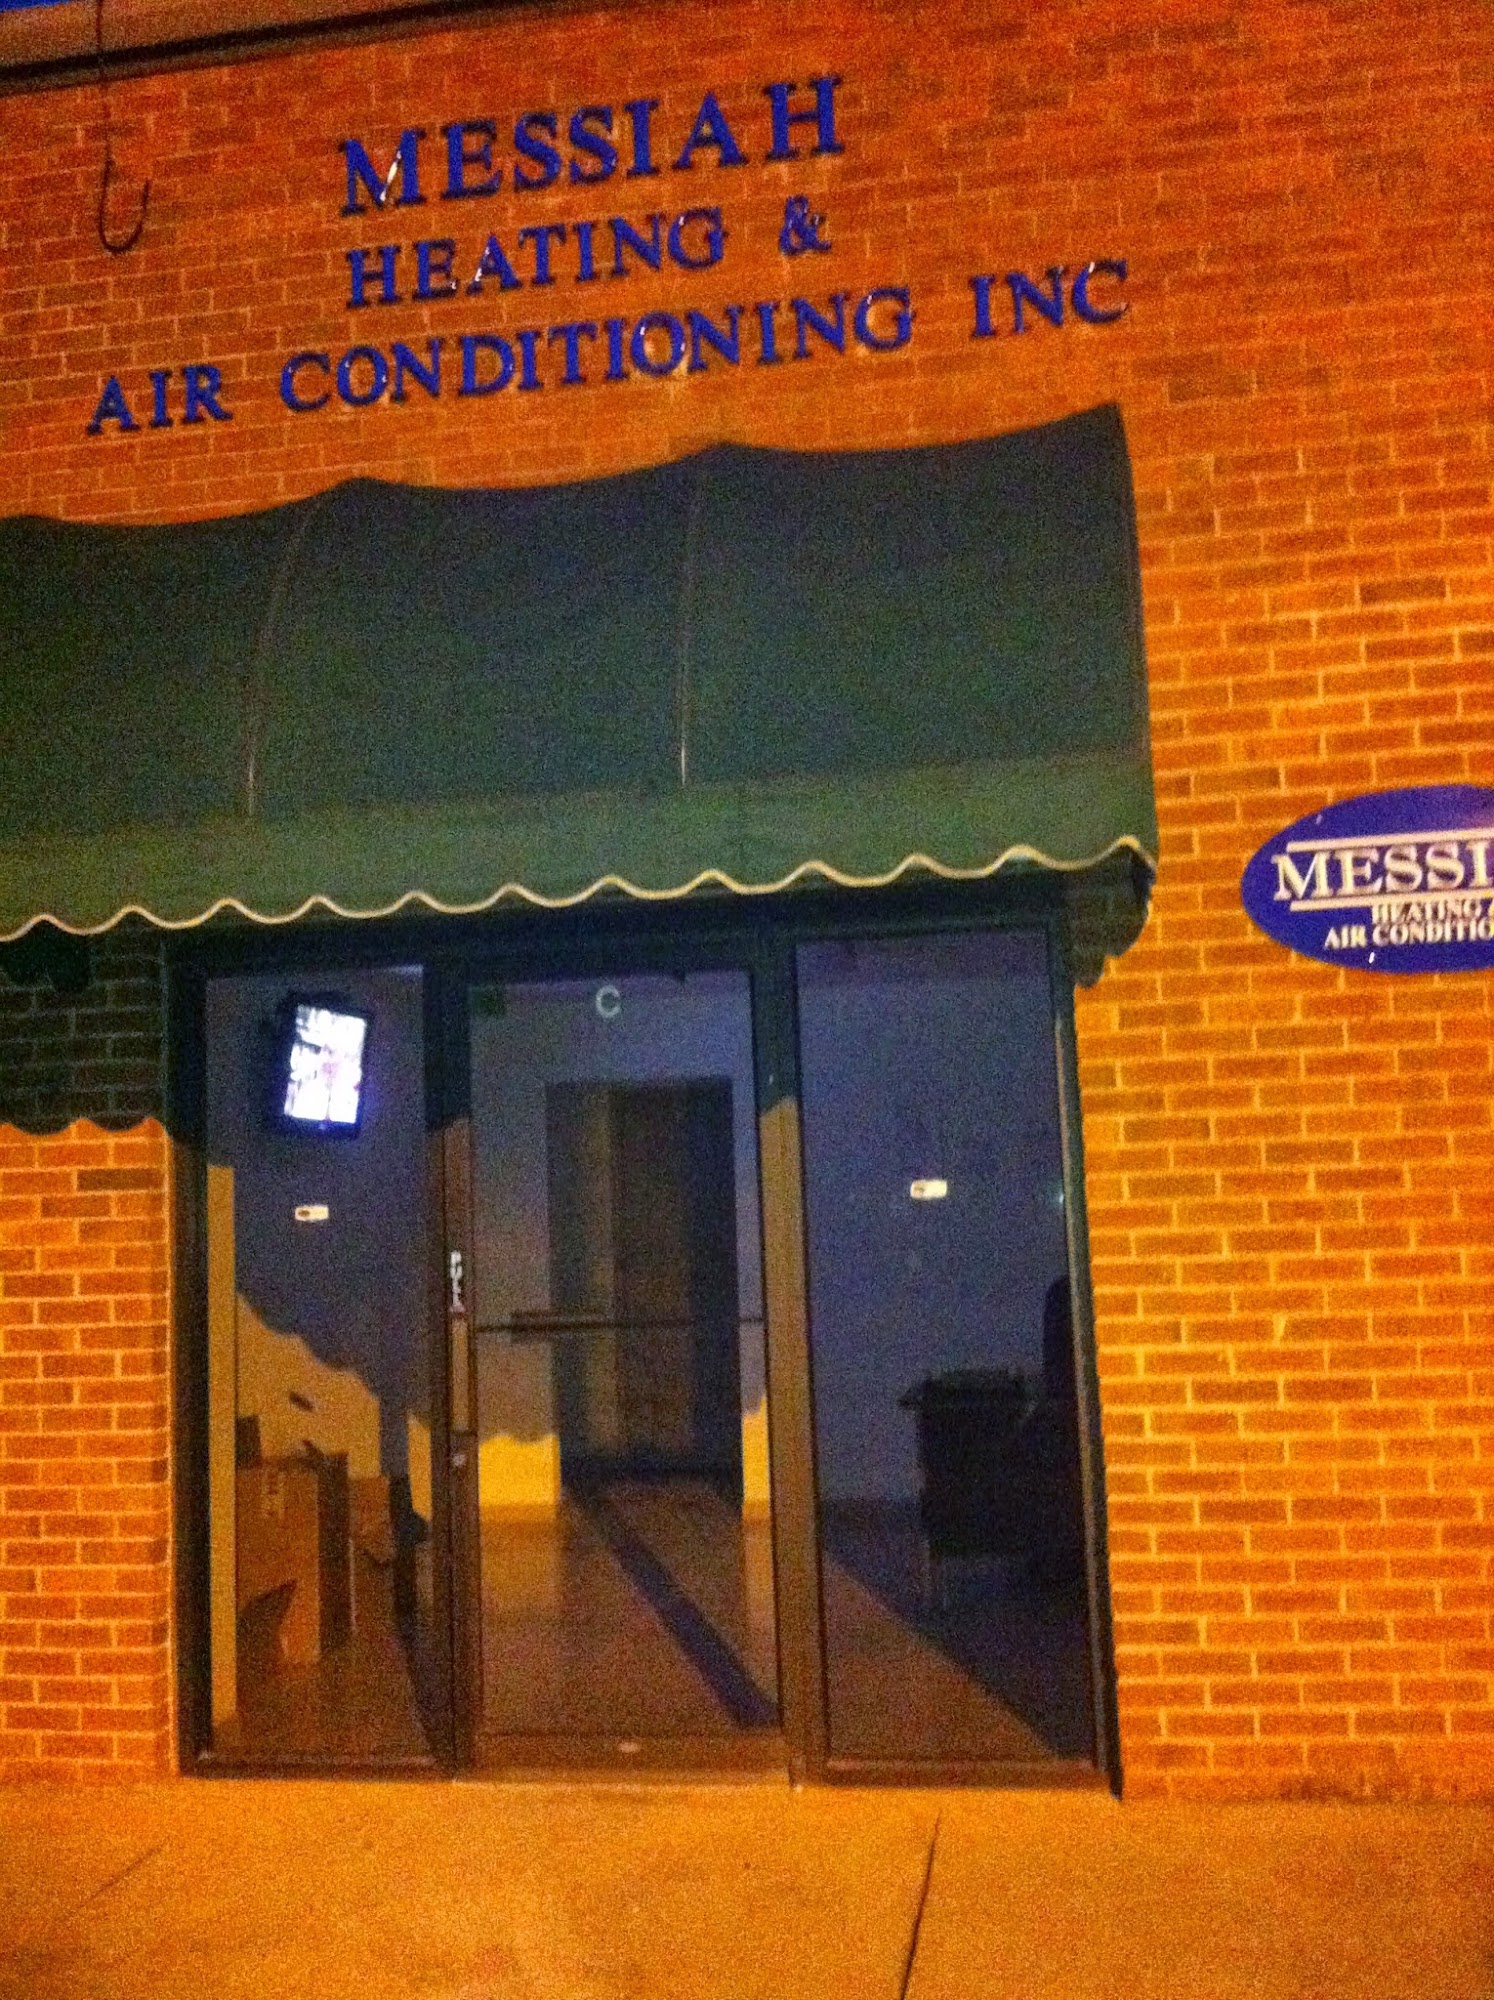 Messiah Heating & Air Conditioning INC